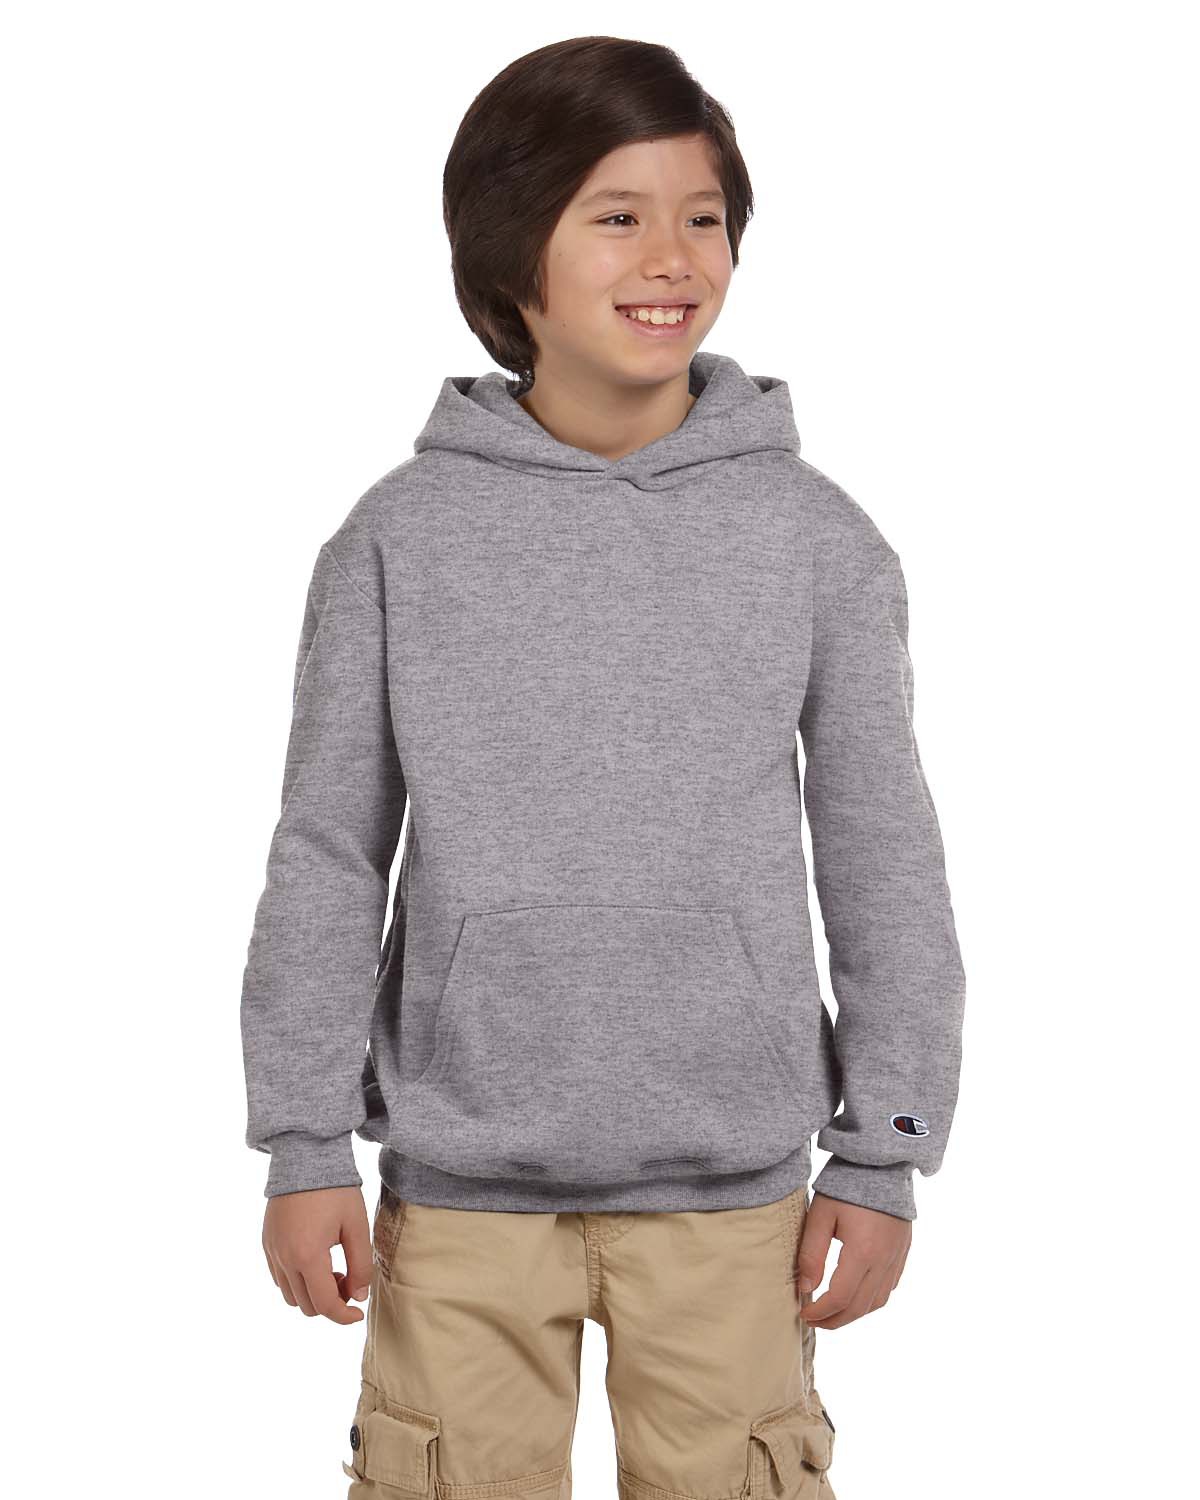 Youth Champion Hoodies, Embroidered With Your Logo!